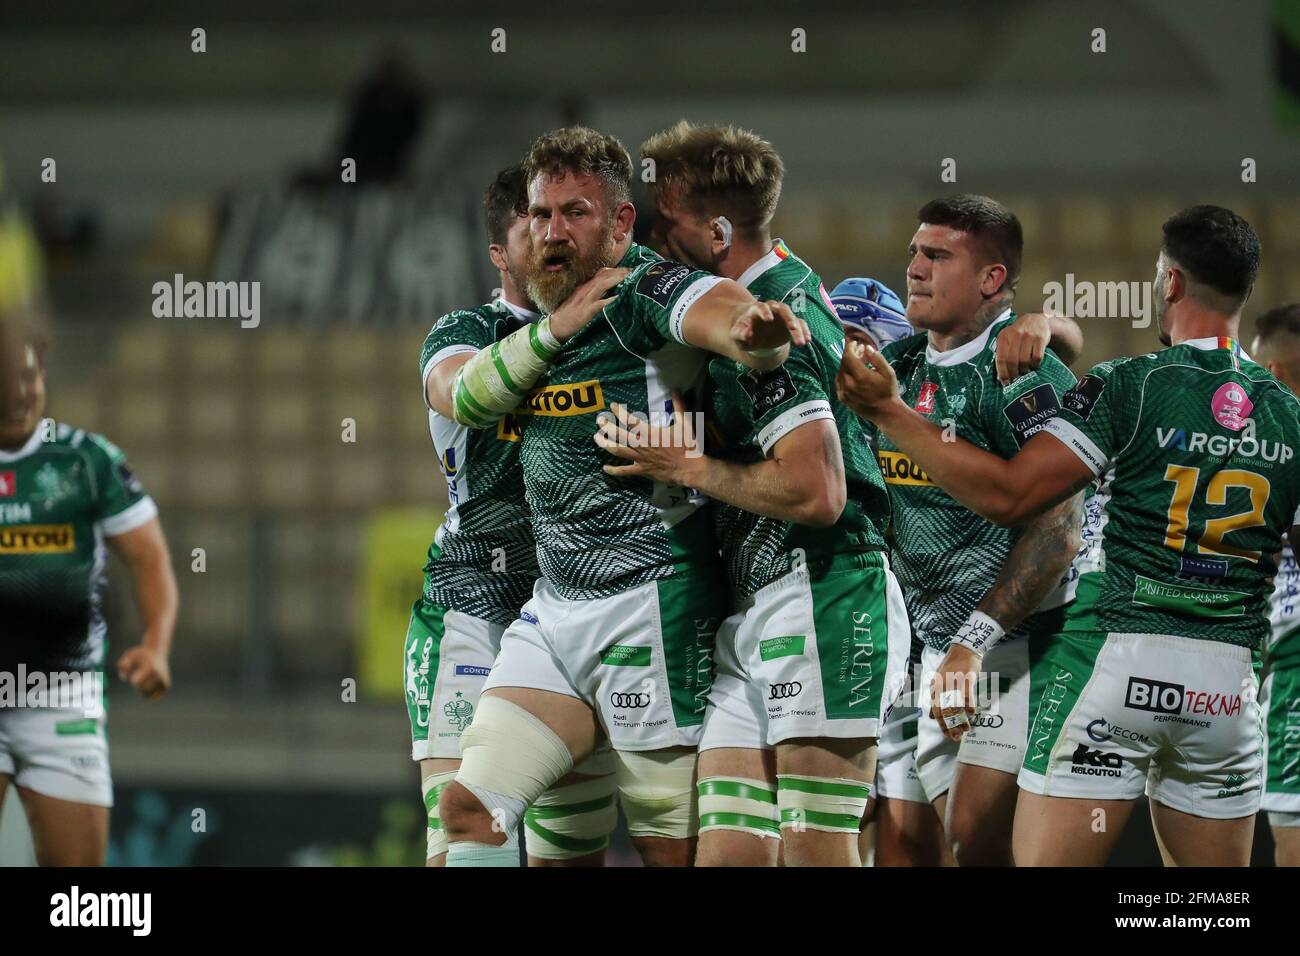 Parma, Italy. 07th May, 2021. Benetton rugby celebrate the try during  Rainbow Cup - Benetton Treviso vs Zebre Rugby, Rugby Guinness Pro 14 match  in Parma, Italy, May 07 2021 Credit: Independent